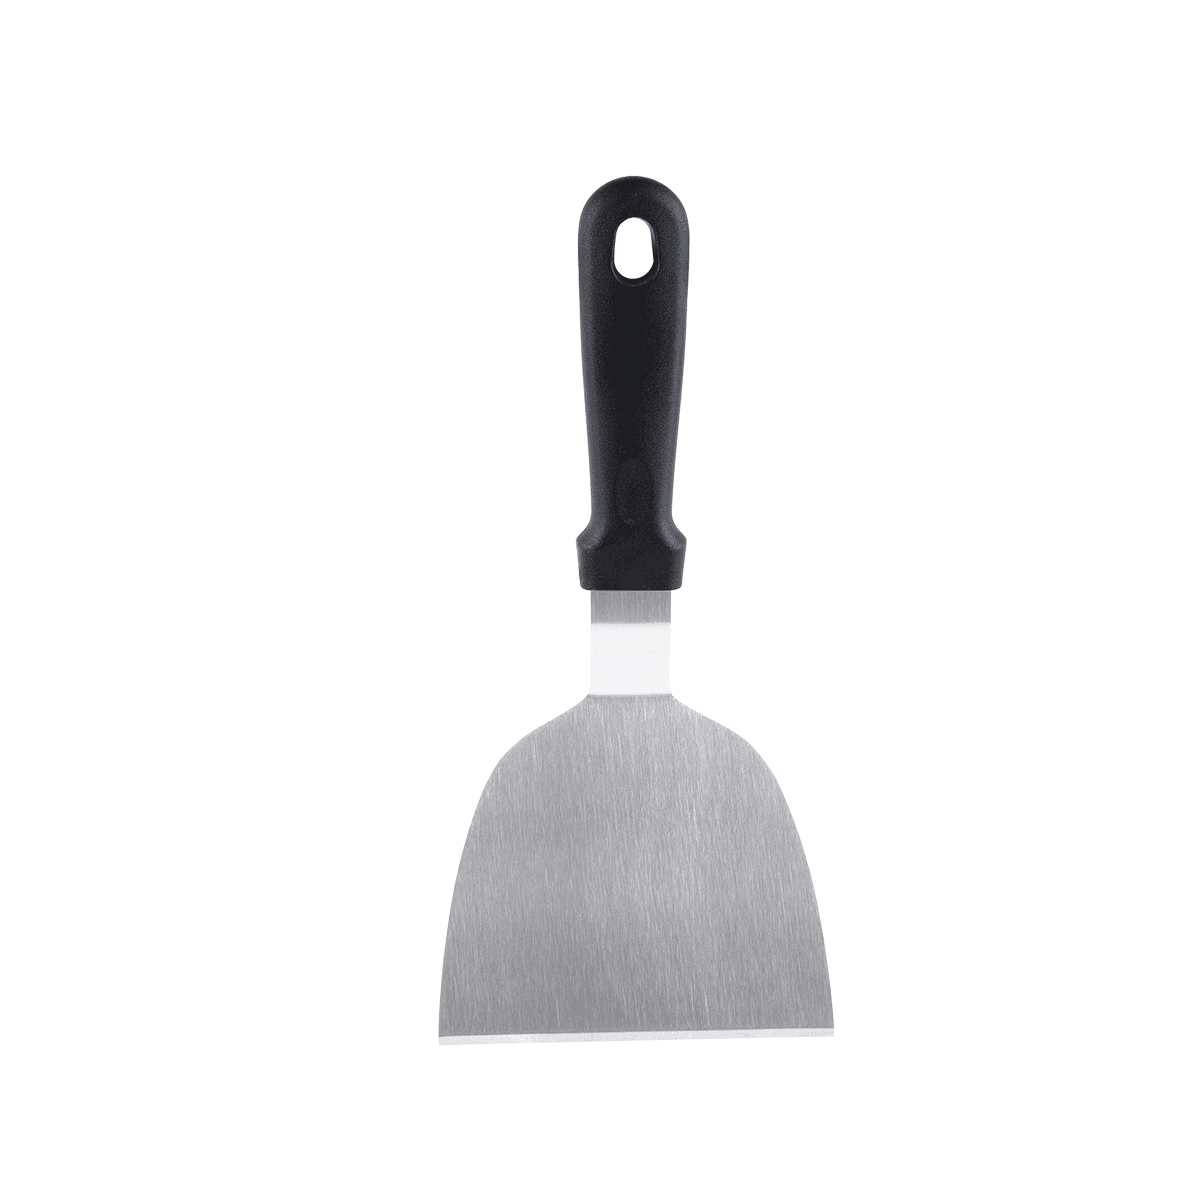 Vague Stainless Steel Shovel with Handle Black Silver Stainless Steel